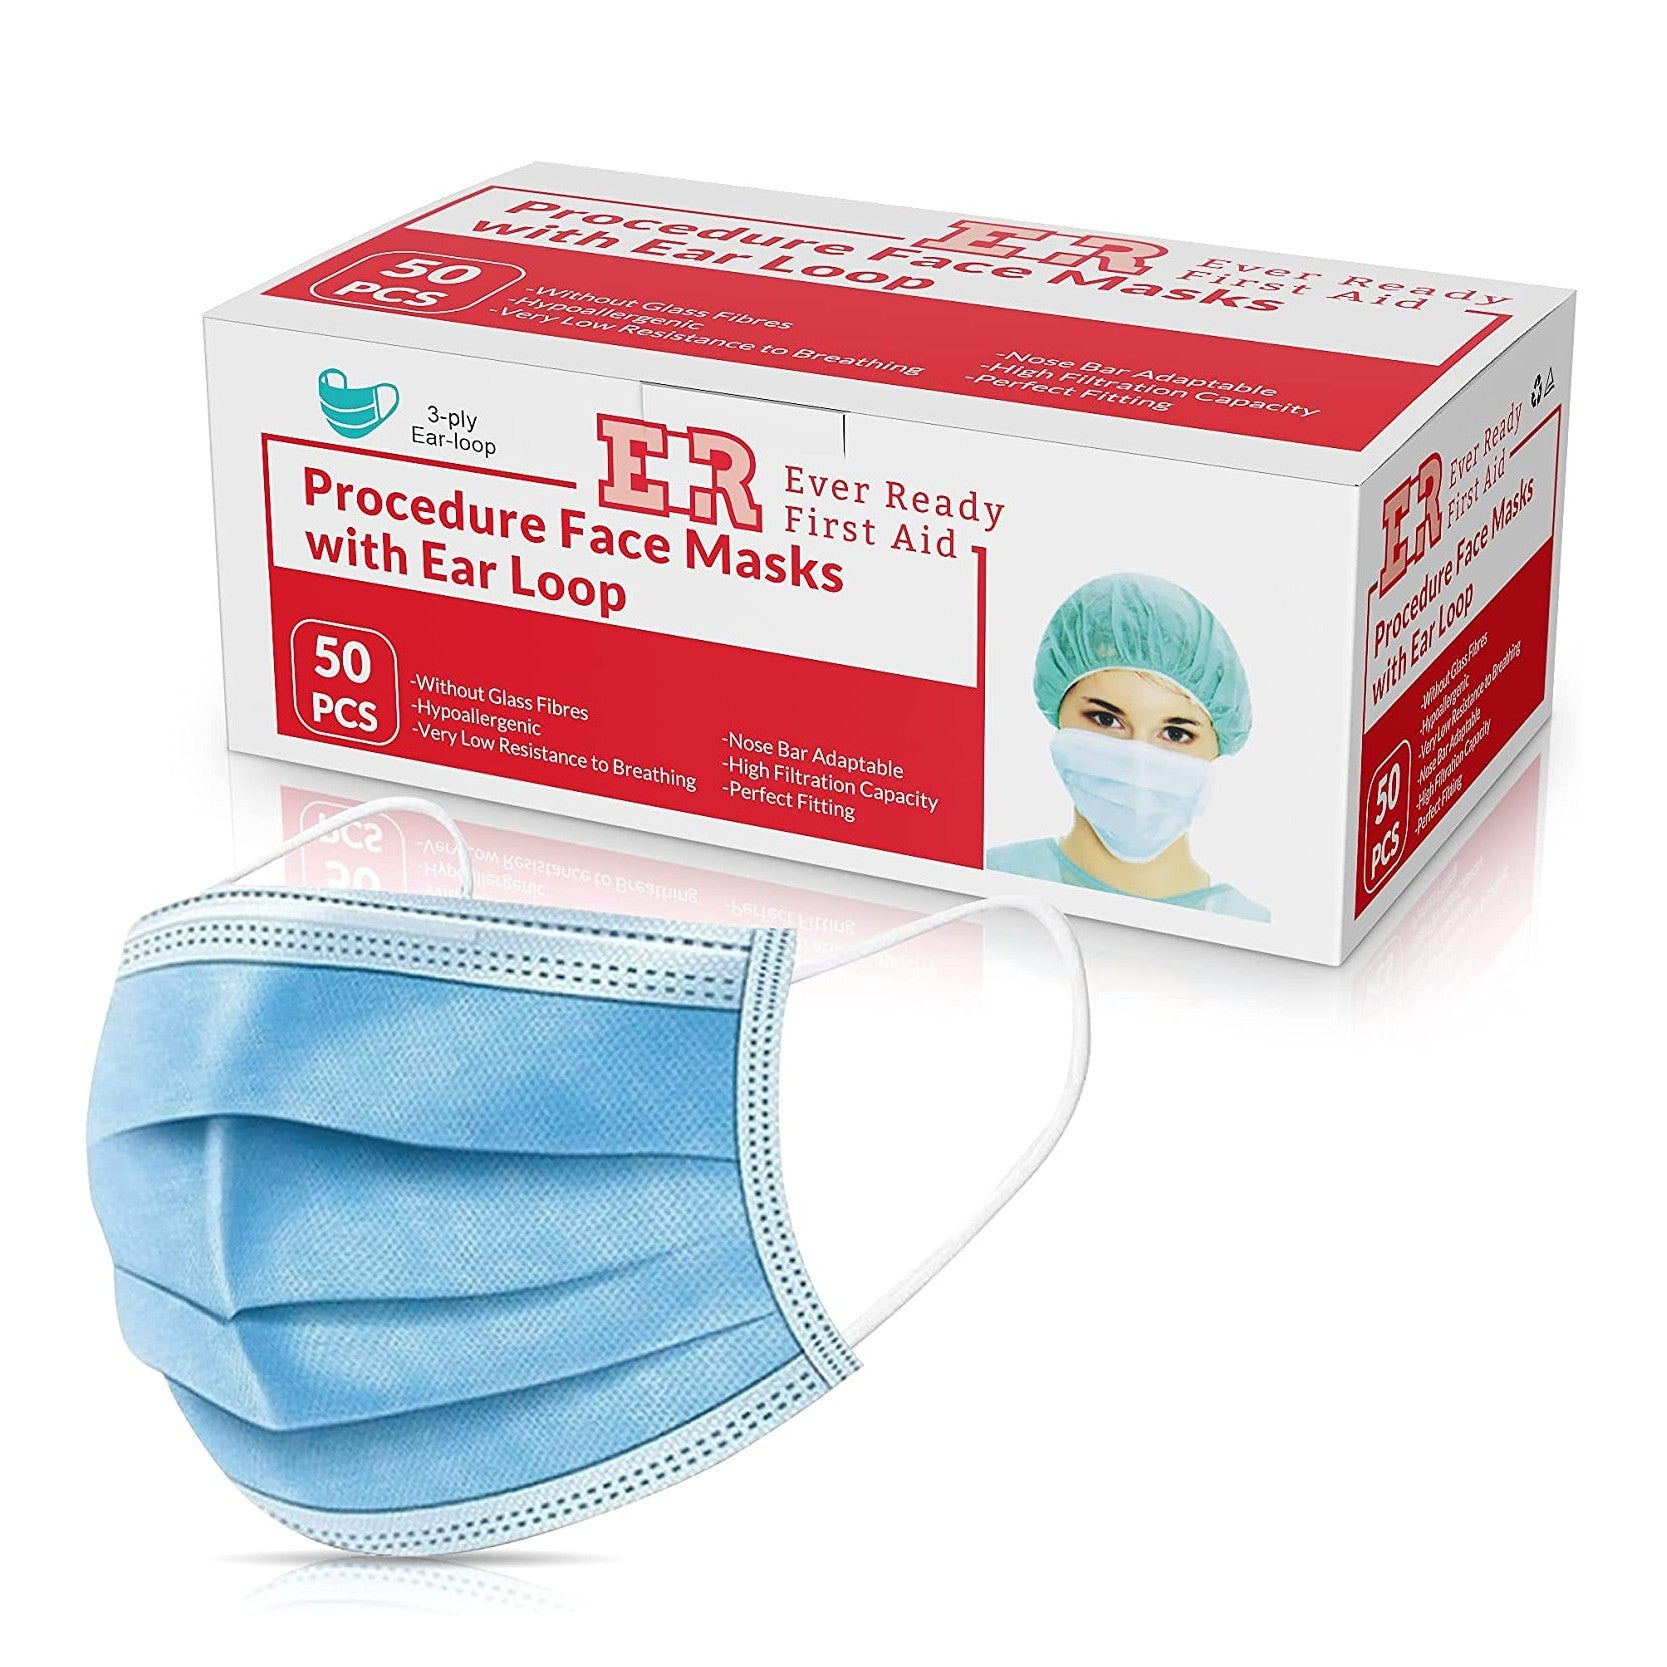 Ever Ready First Aid 3-ply Disposable Face Mask - 50/pack